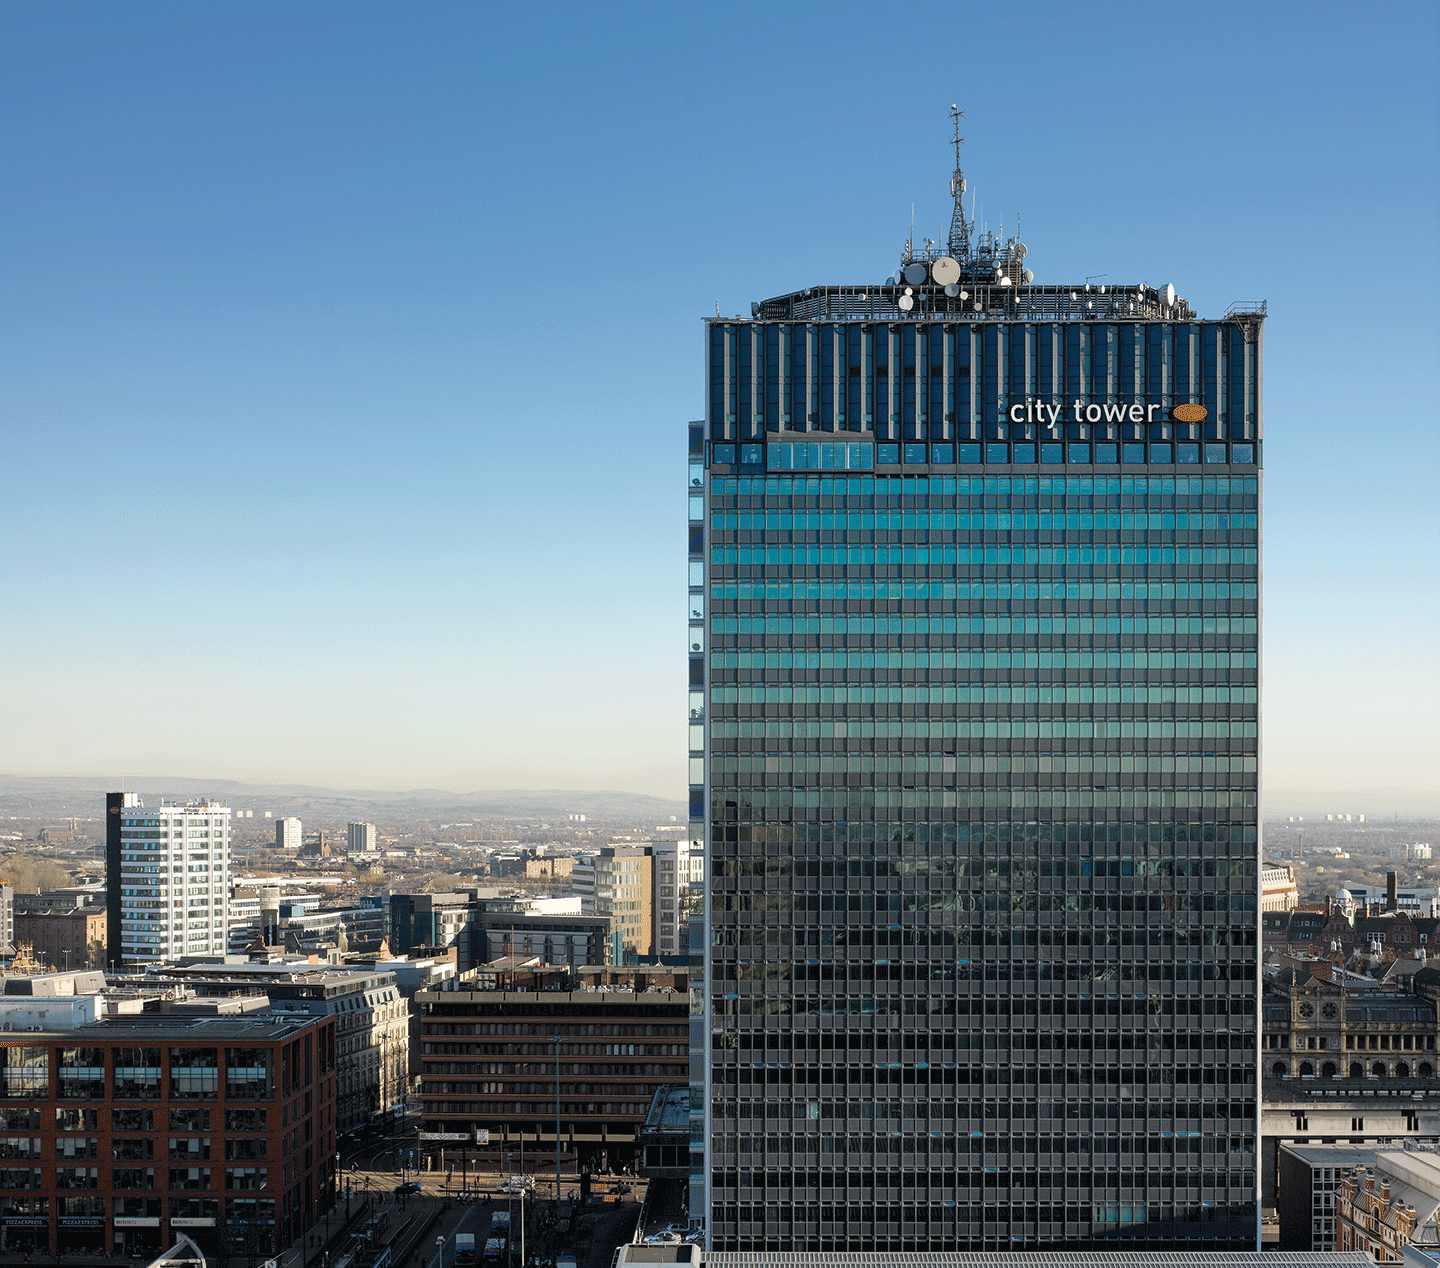 City Tower, Manchester